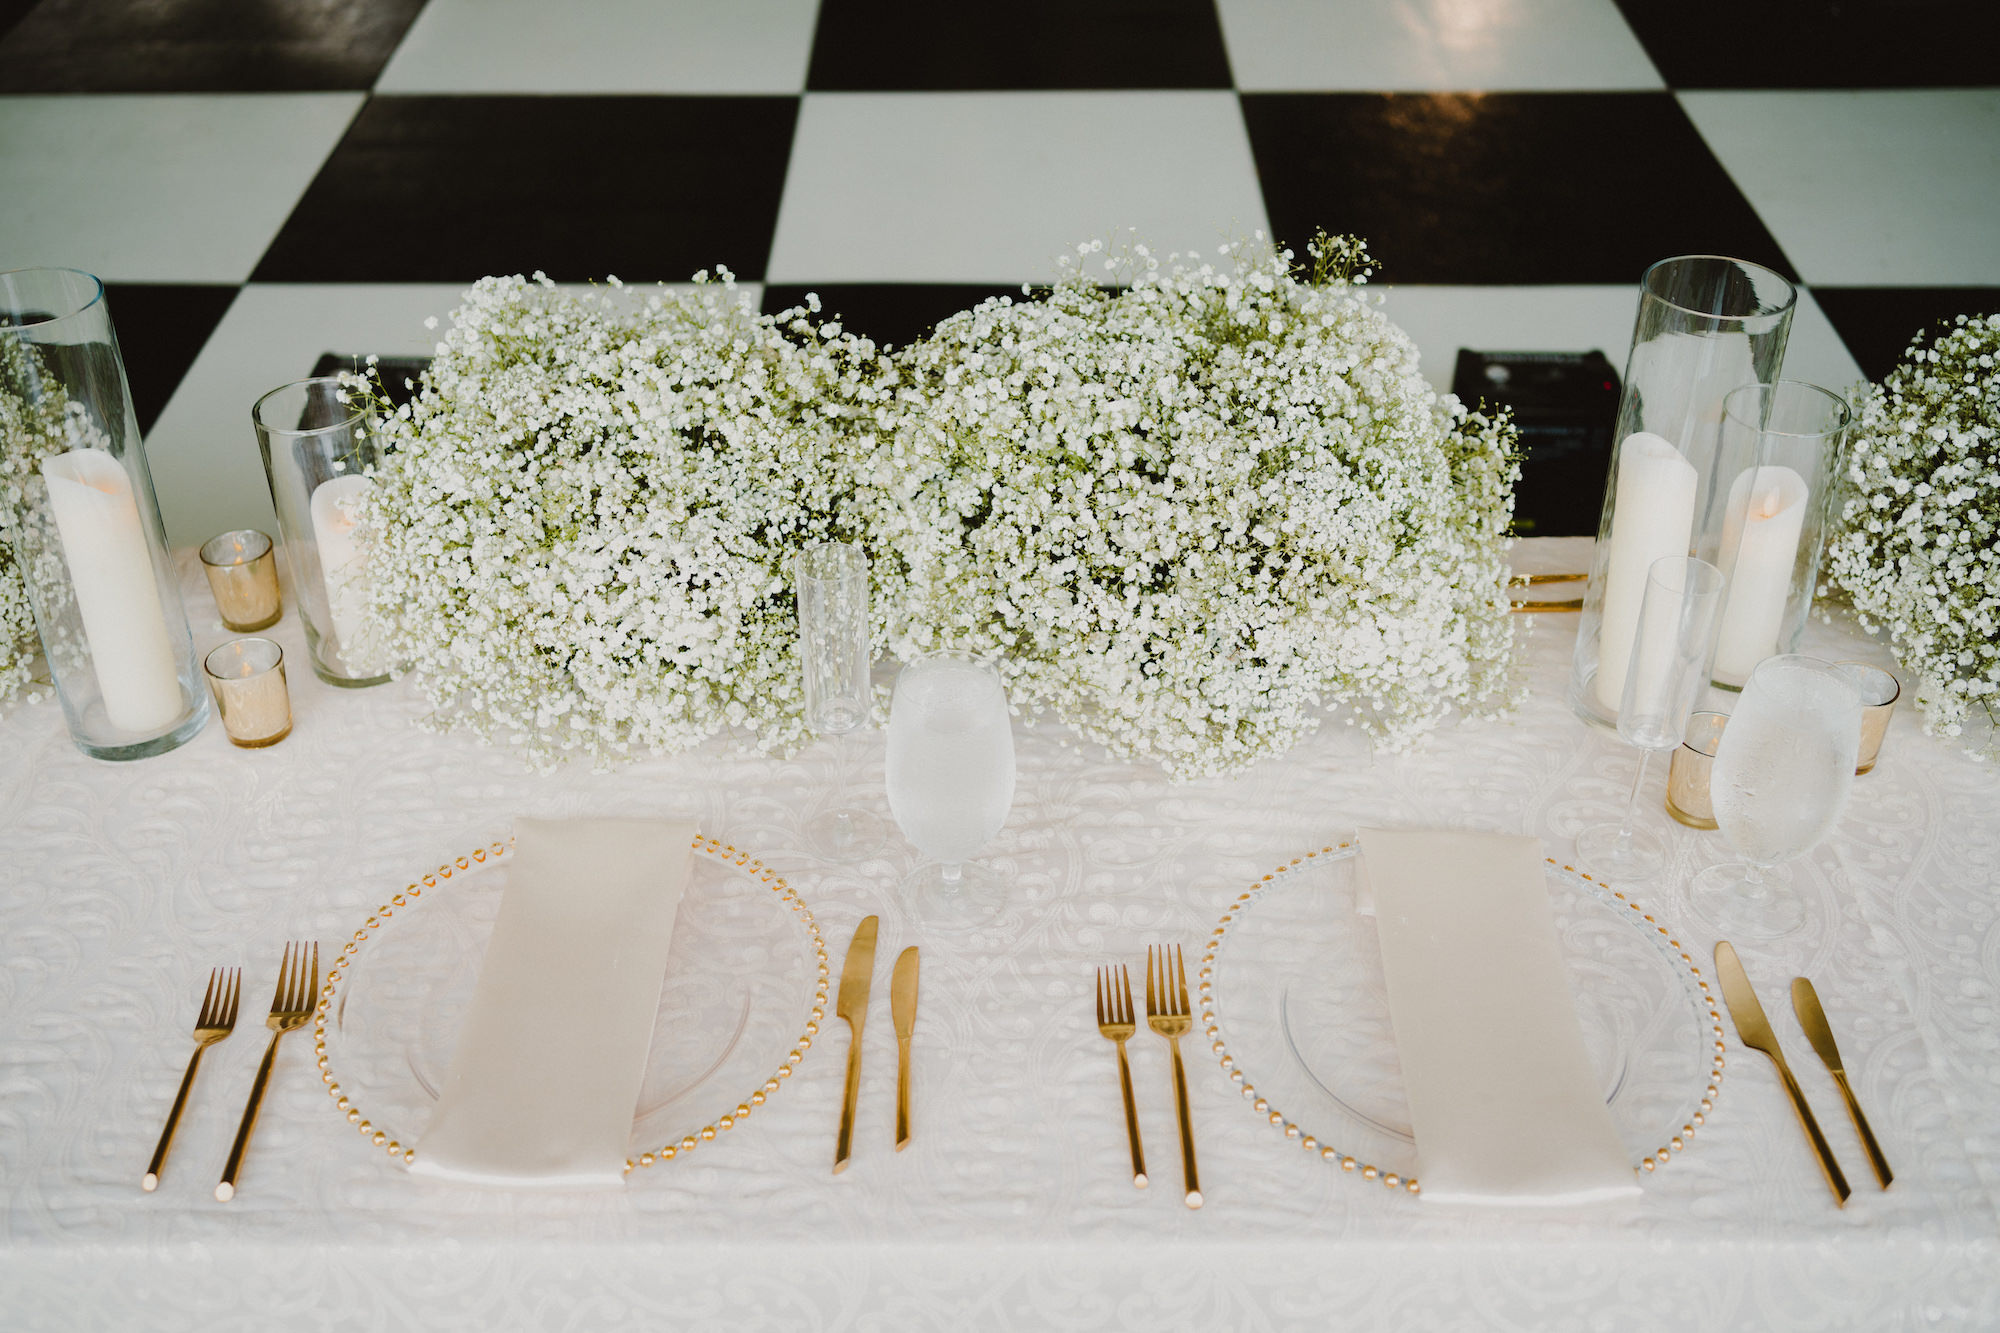 Candlelit Sweetheart Table with Lace Linen and Gold Table Setting Ideas | Sarasota Kate Ryan Event Rentals